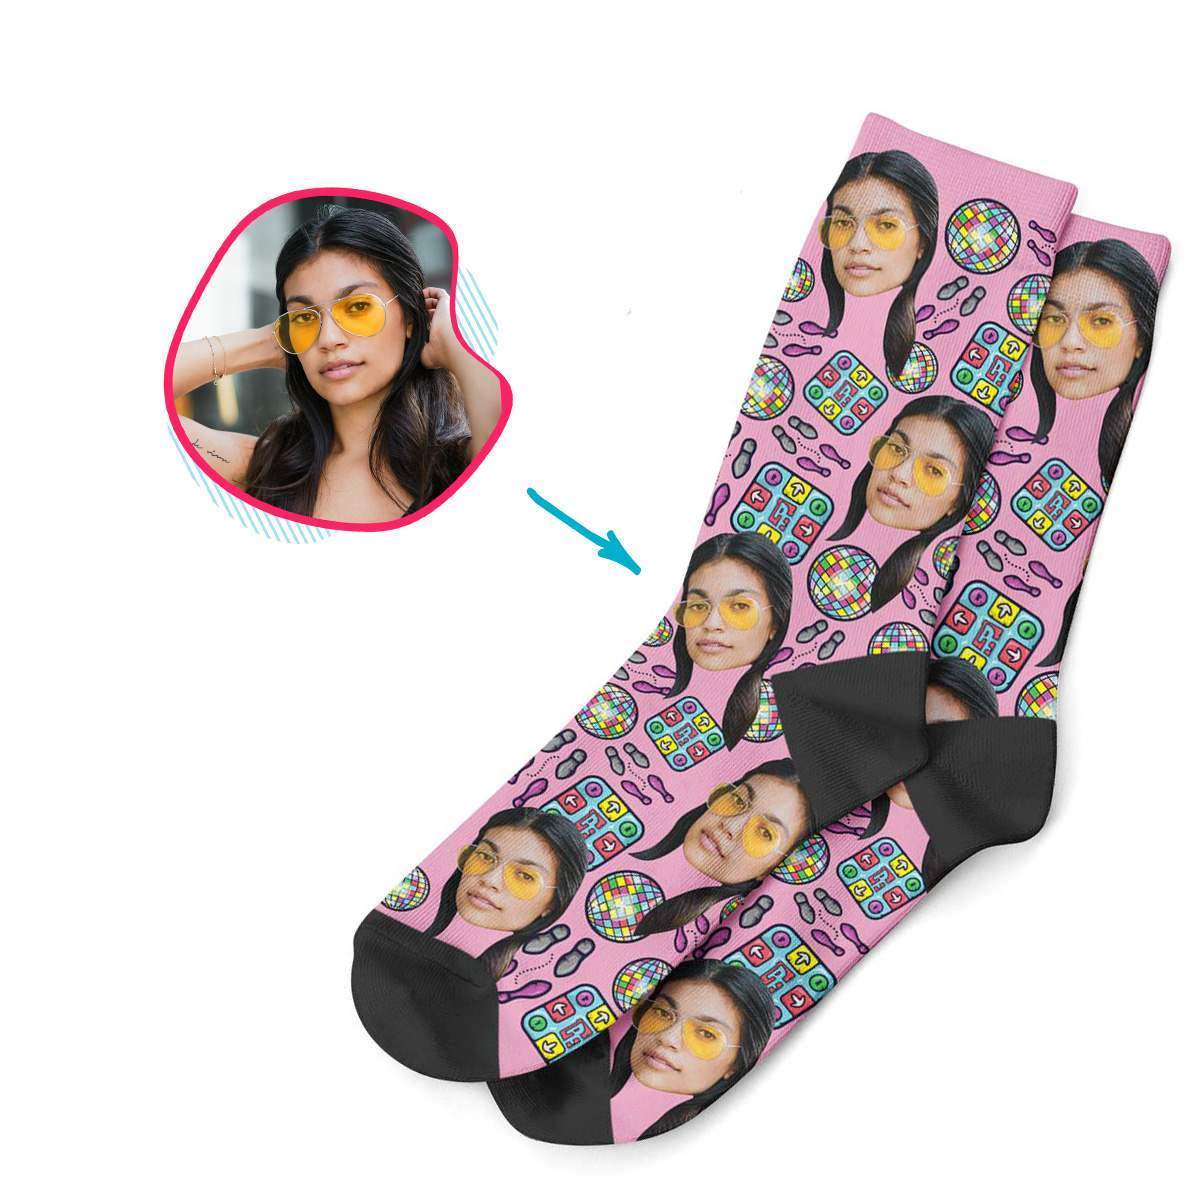 pink Dancing socks personalized with photo of face printed on them